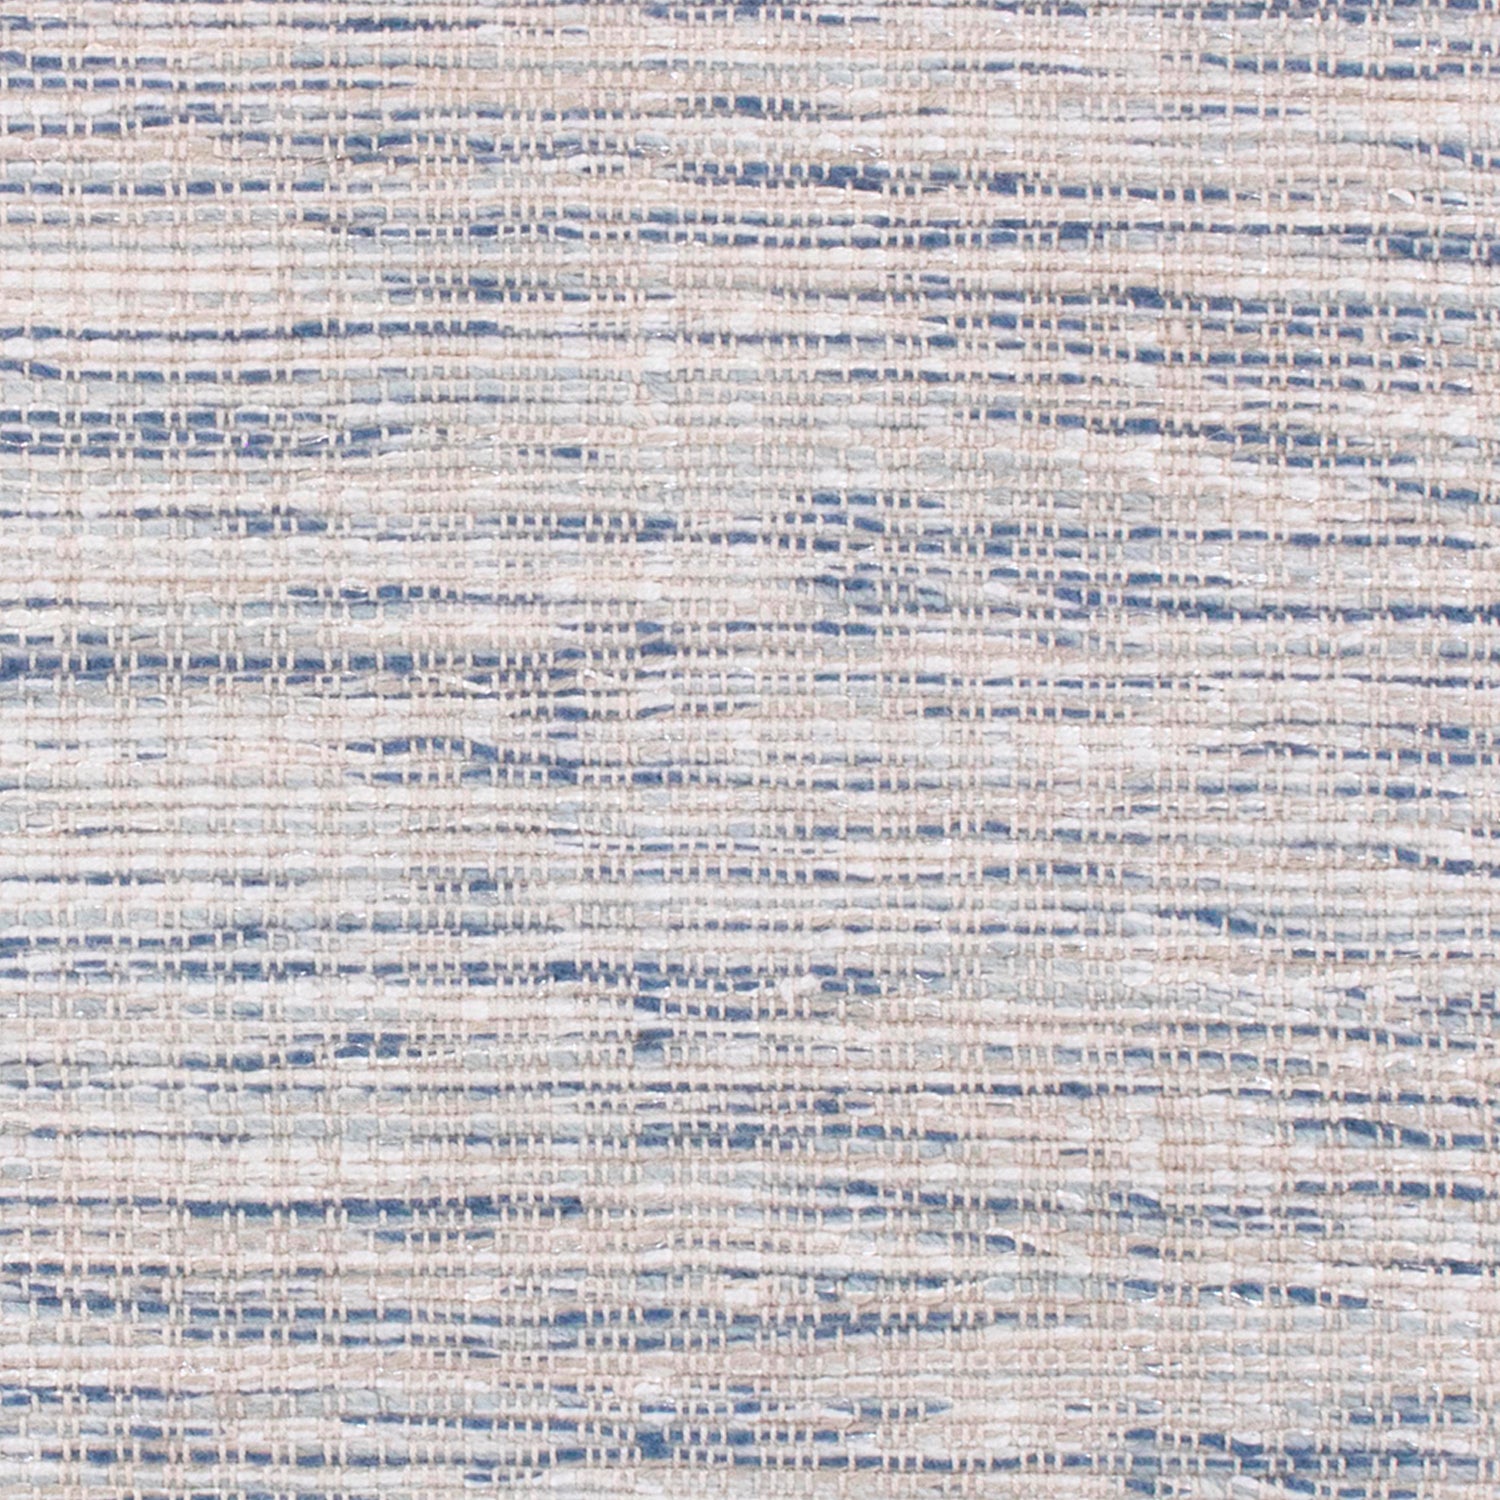 Wool-blend broadloom carpet swatch in a chunky flat weave in mottled white, cream and blue.